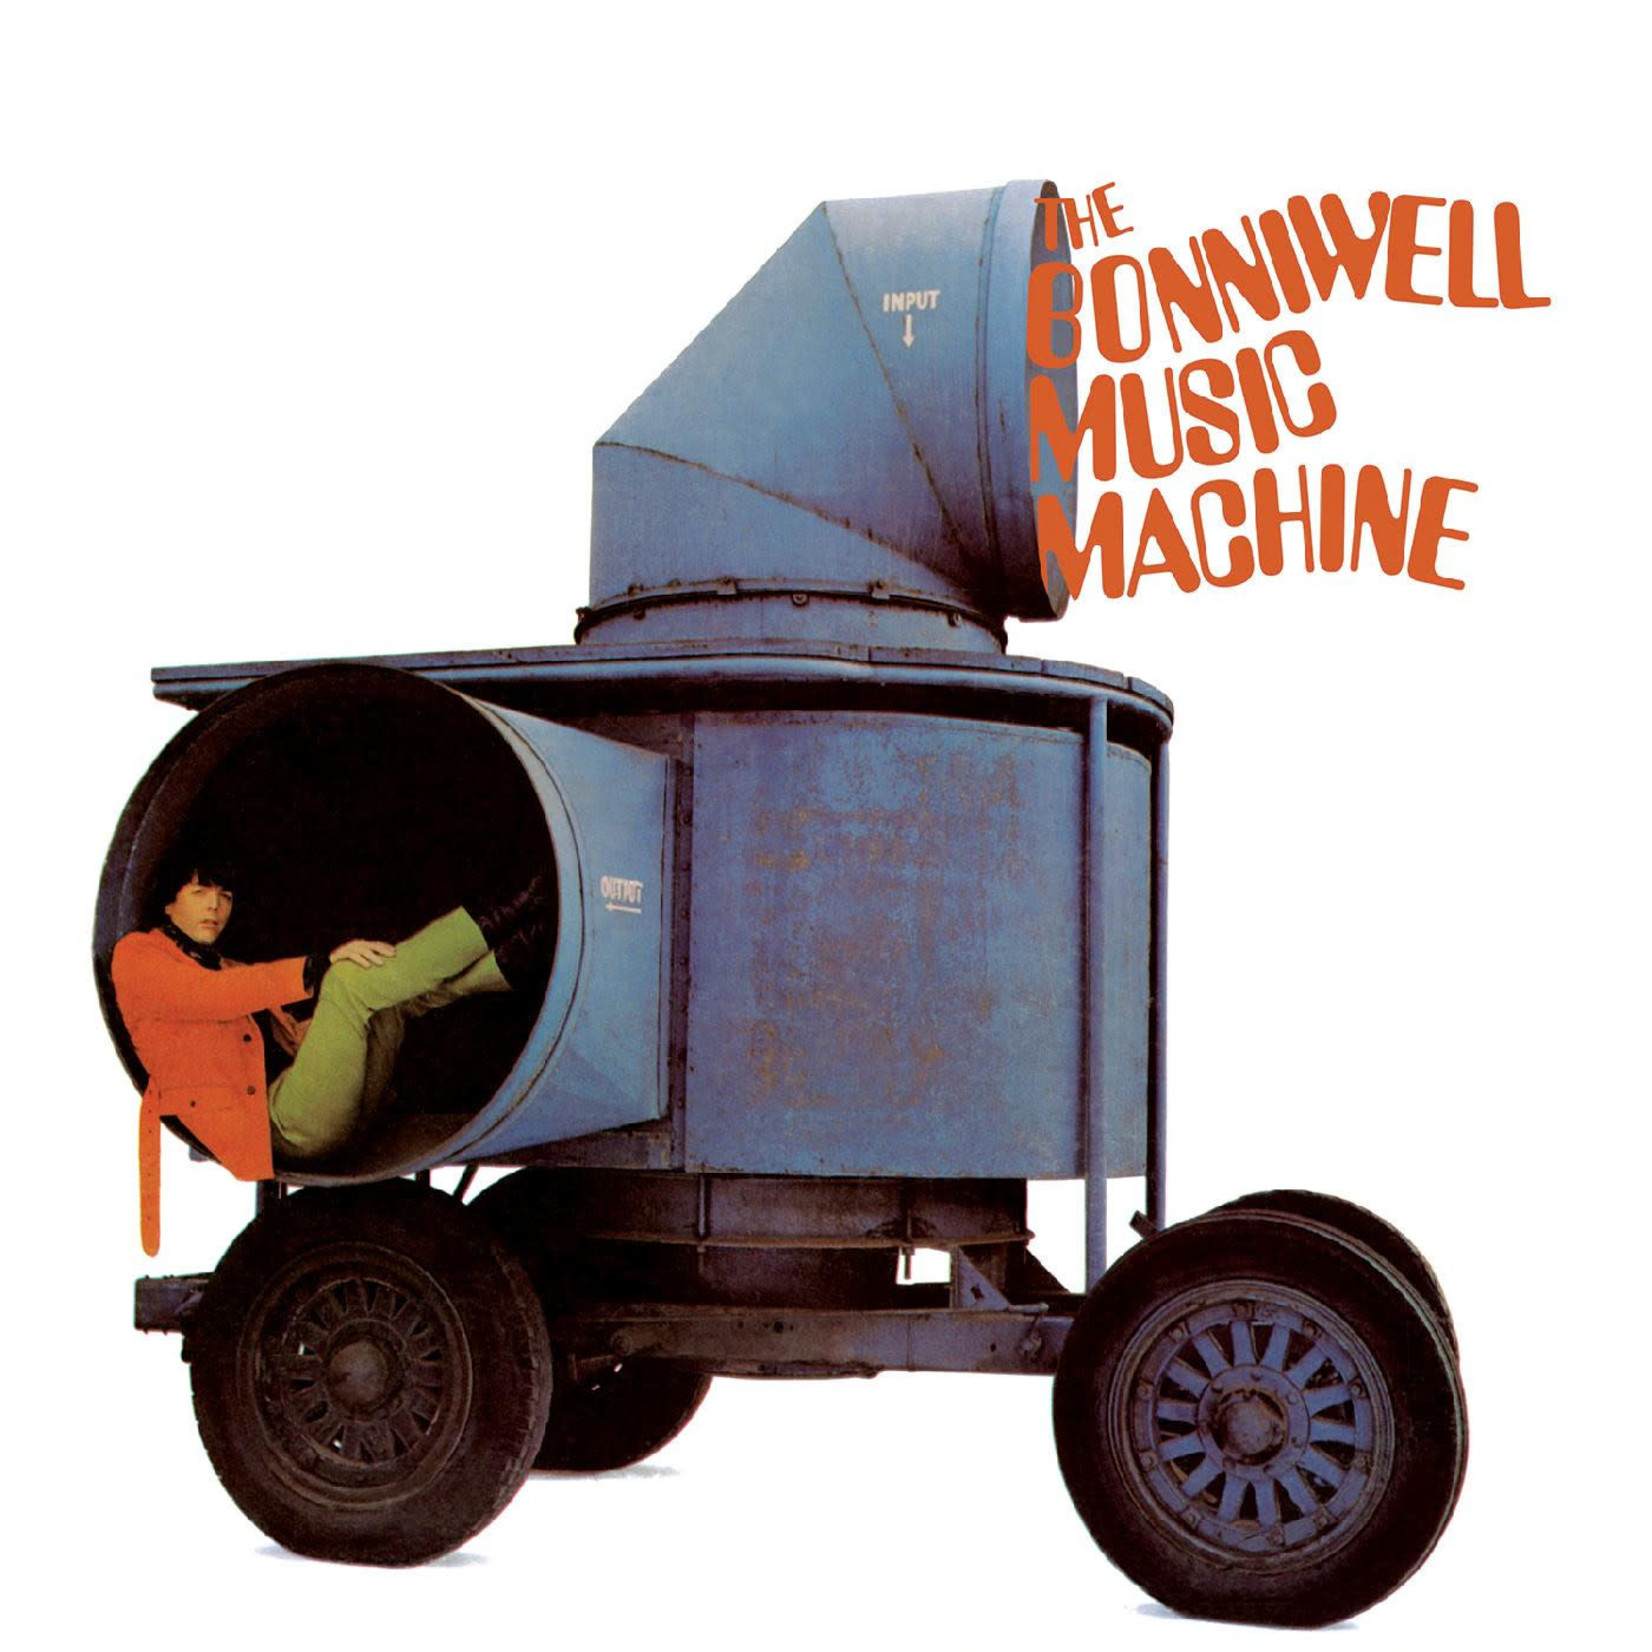 [New] Bonniwell Music Machine, The: The Bonniwell Music Machine (Limited Olive Green Vinyl Edition) [REAL GONE MUSIC]